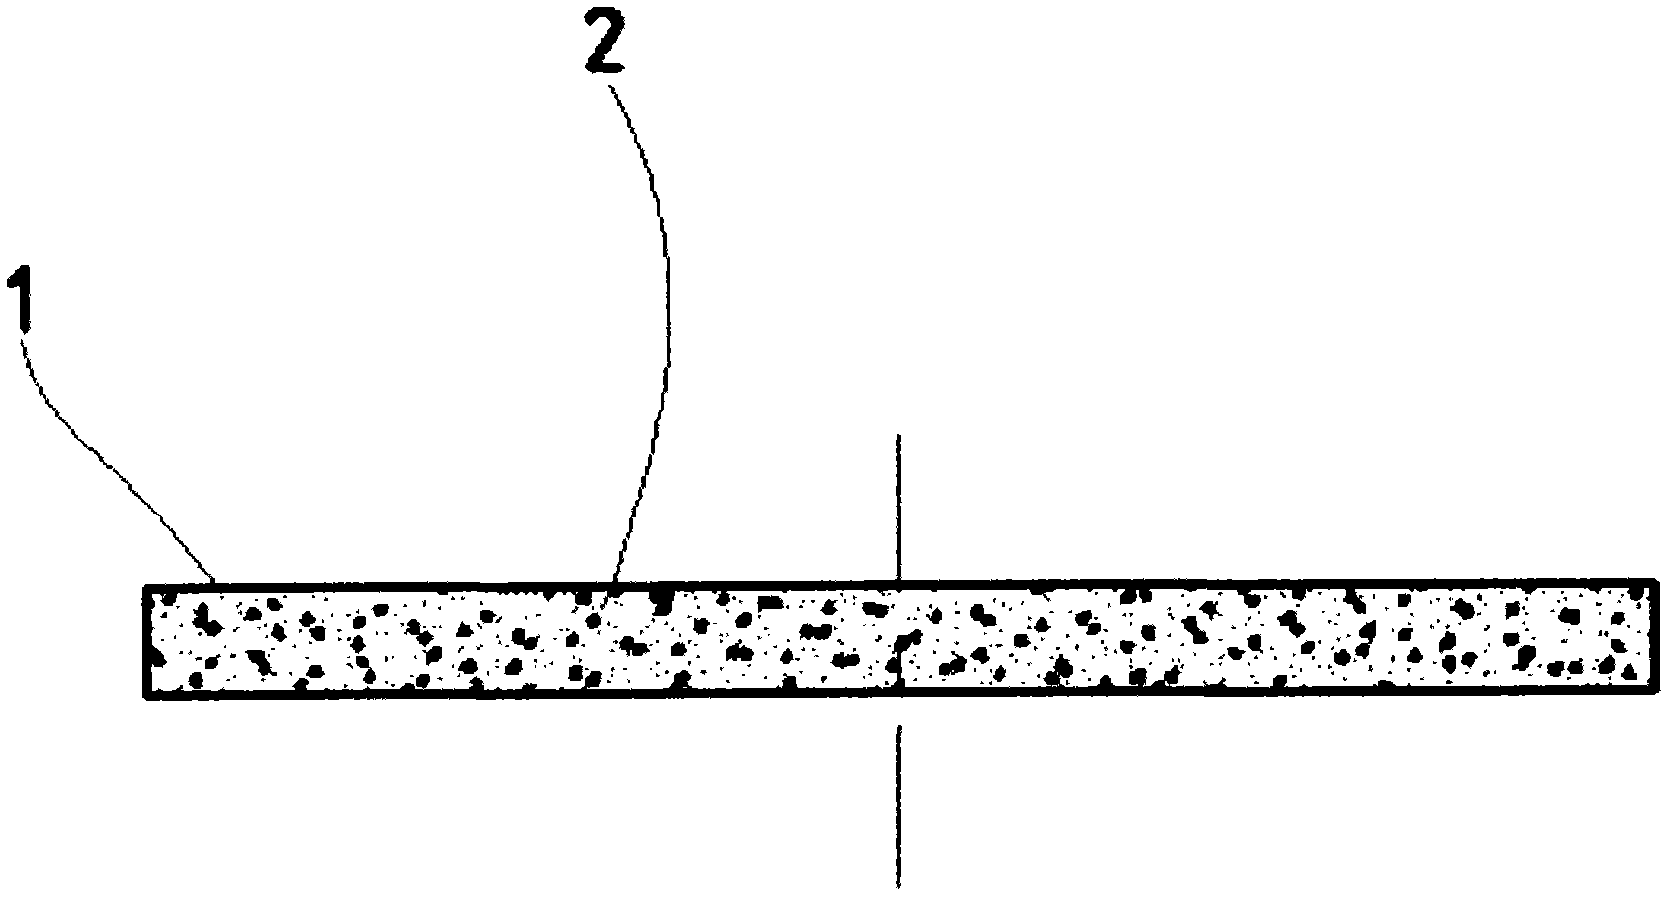 Antibacterial microporous ceramic and manufacturing method thereof